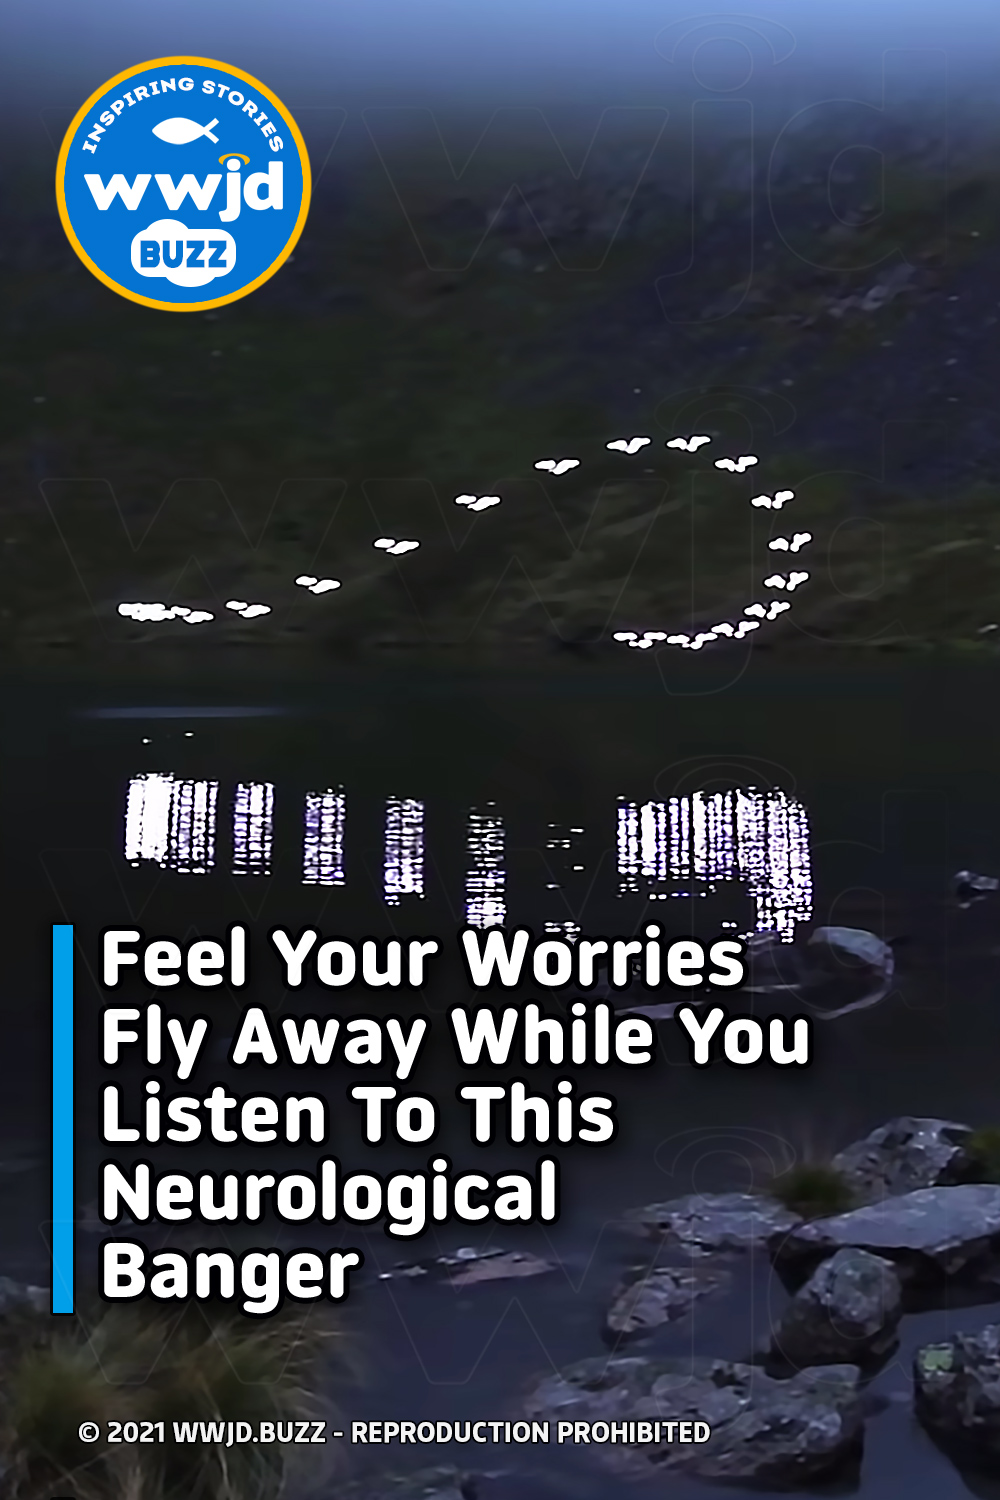 Feel Your Worries Fly Away While You Listen To This Neurological Banger